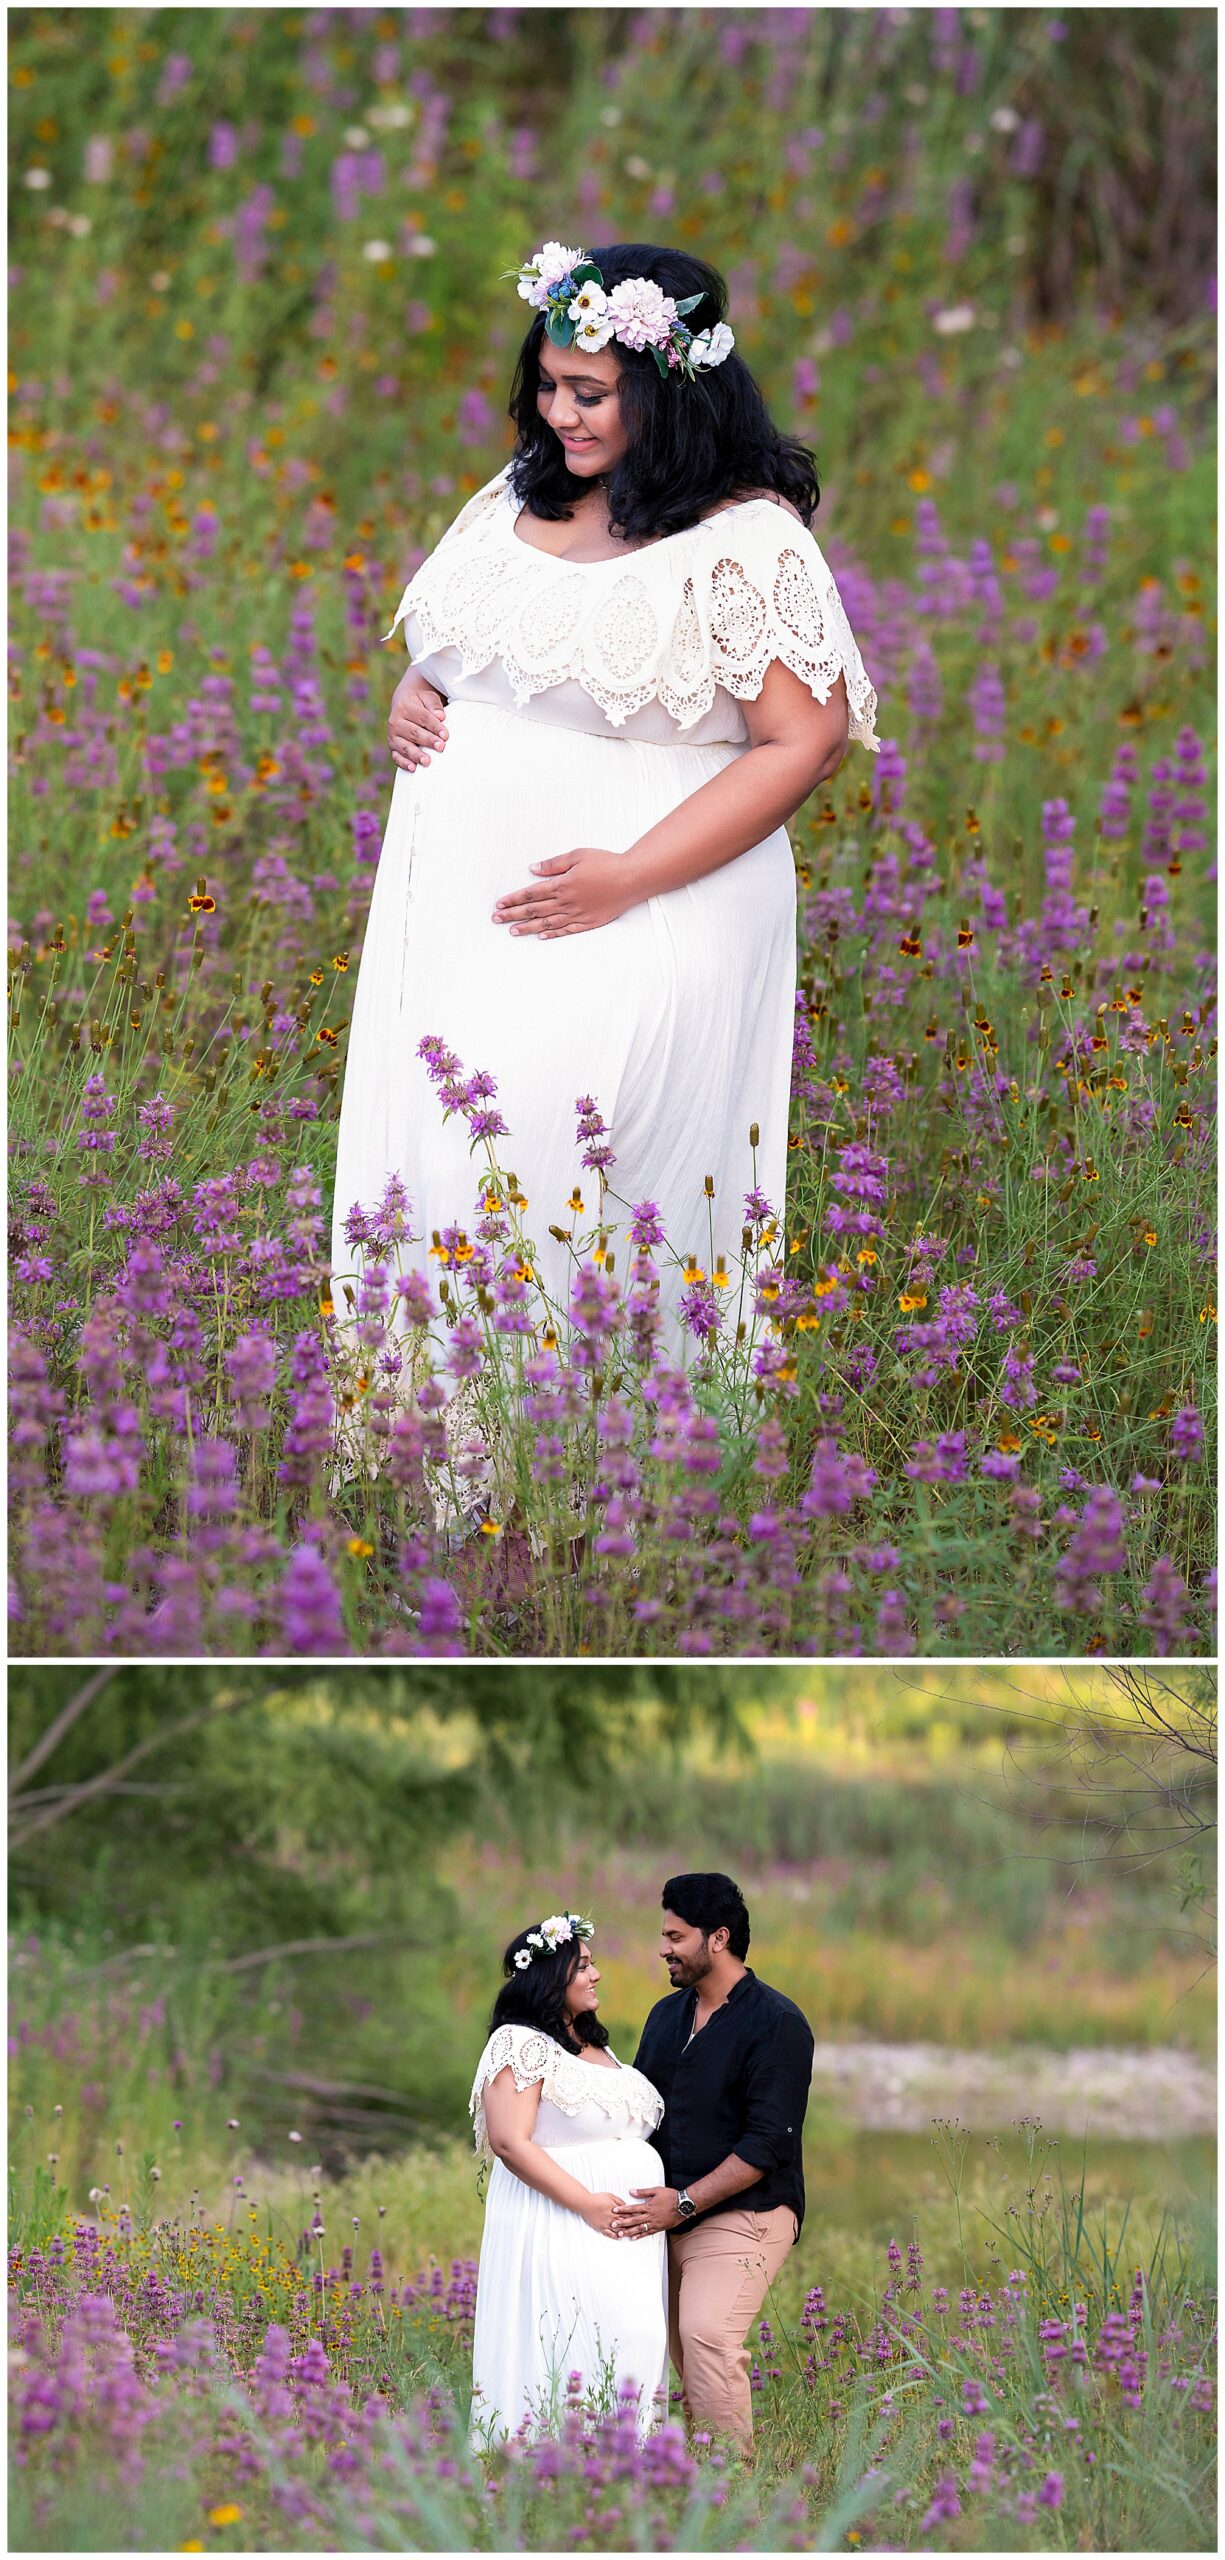 Two full-color Texas wildflower maternity photos: The top photo features a woman in a floral headdress and a white dress standing in a field of purple wildflowers. The bottom photo features a man in a black shirt facing a pregnant woman in a white dress who are both standing in a field of wildlflowers.